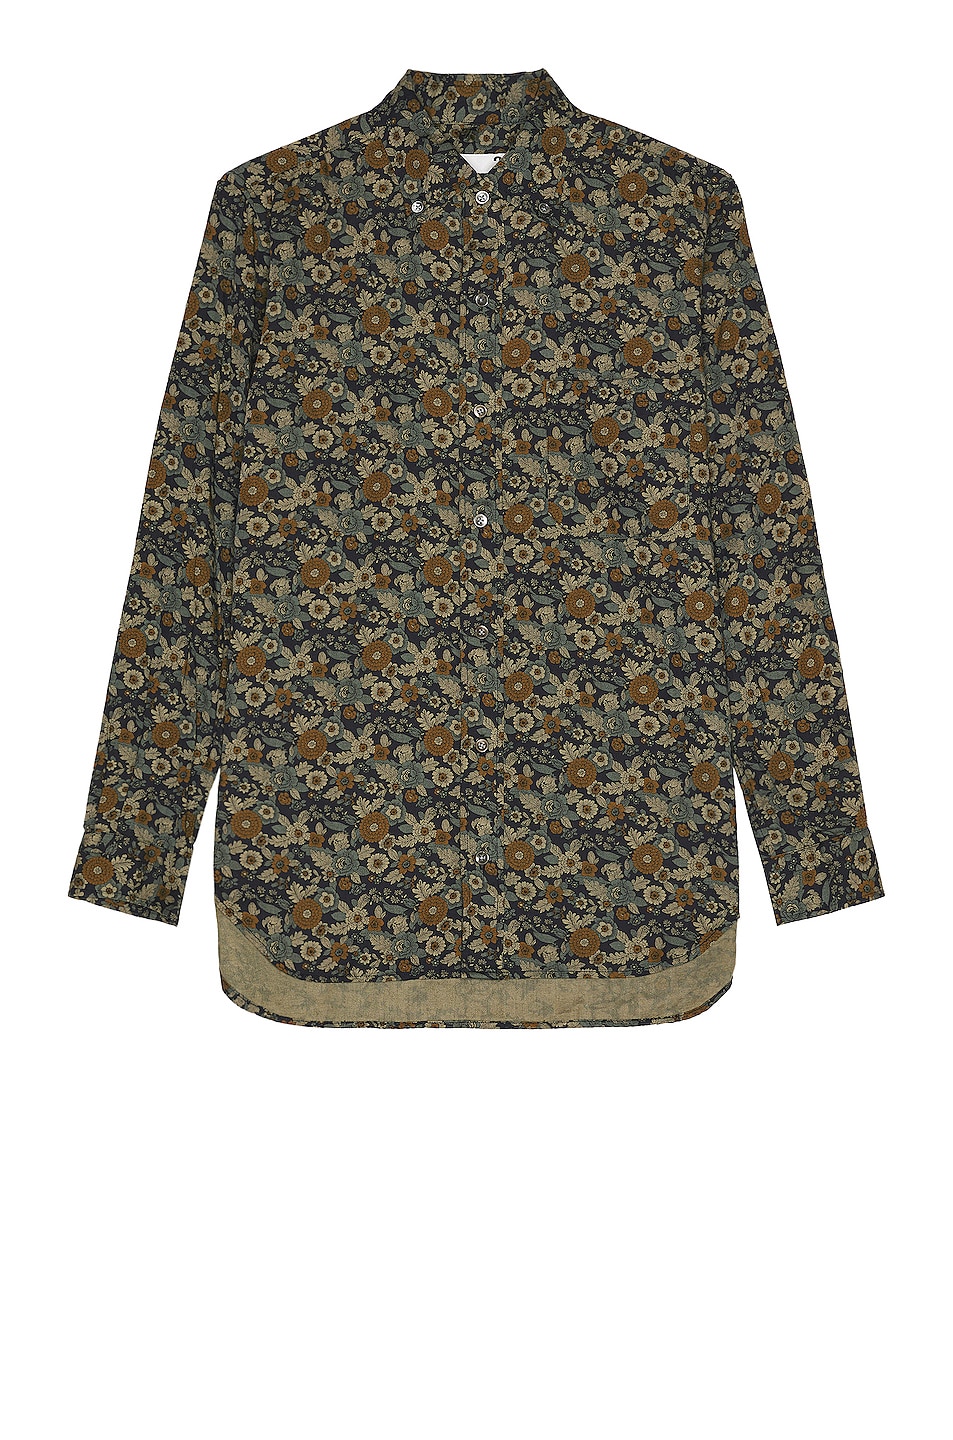 Image 1 of TS(S) Flower Print B.D.Shirt in Olive